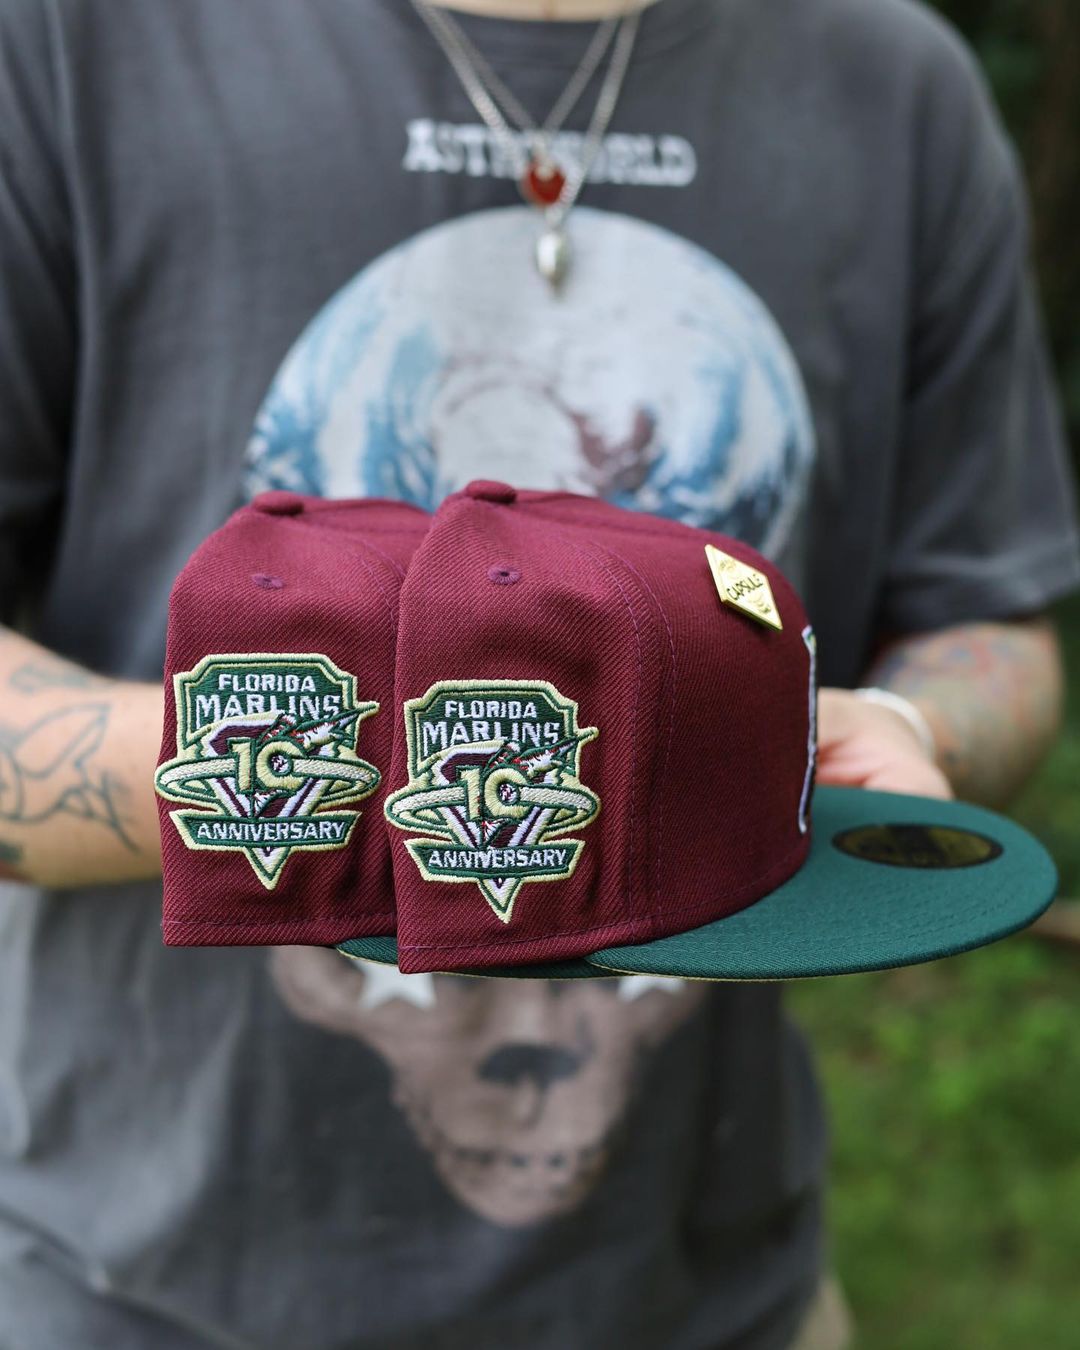 Burgundy Bliss 2 Tone Fitted Hats